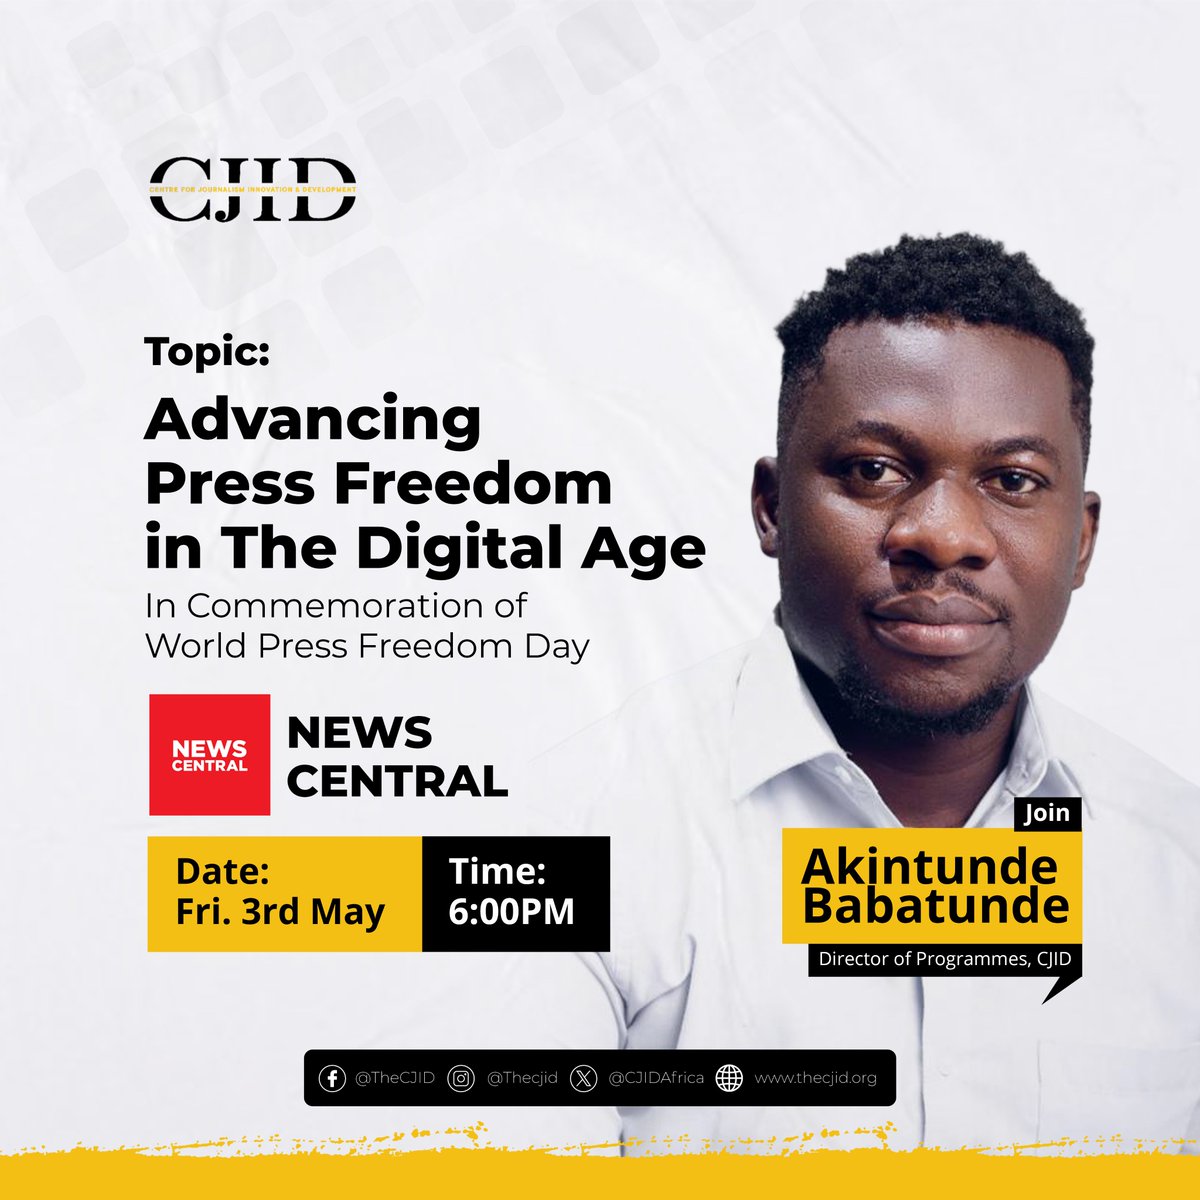 CJID's Director of Programmes, Akintunde Babatunde @olorunwababs, will be live on @NewsCentralTV at 6:00pm to discuss the 'Advancing Press Freedom in the Digital Age' in commemoration of #WorldPressFreedomDay Tune in then!